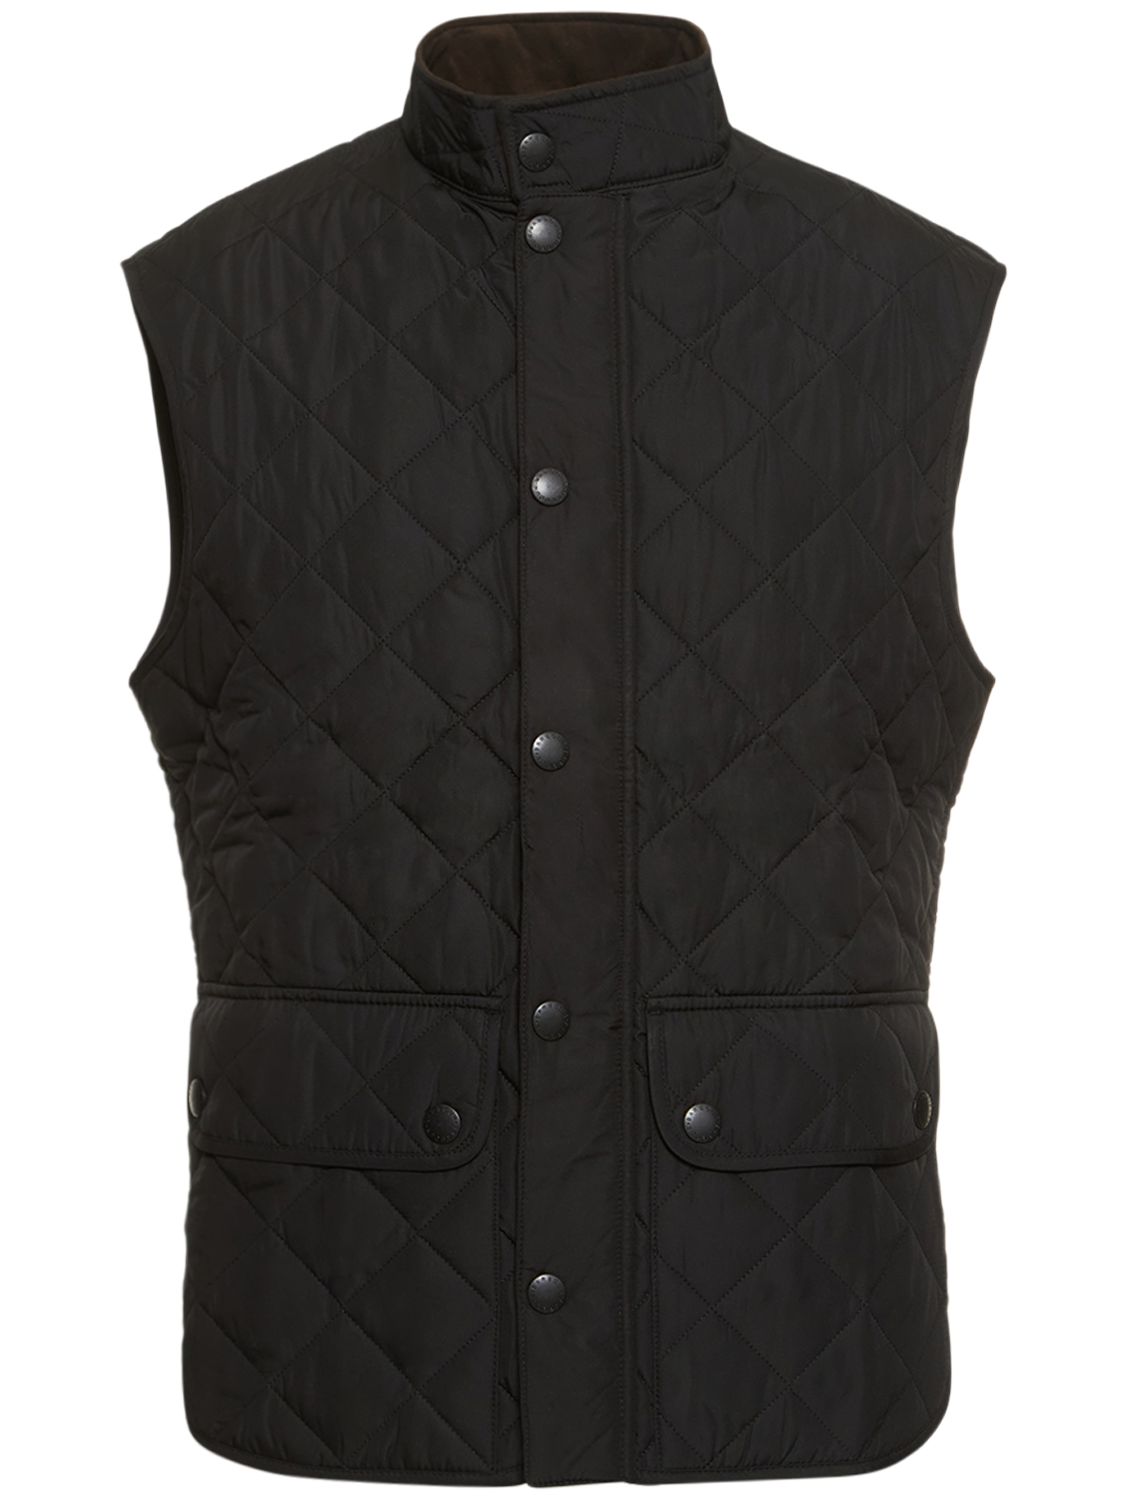 Image of Lowerdale Quilted Cotton Vest